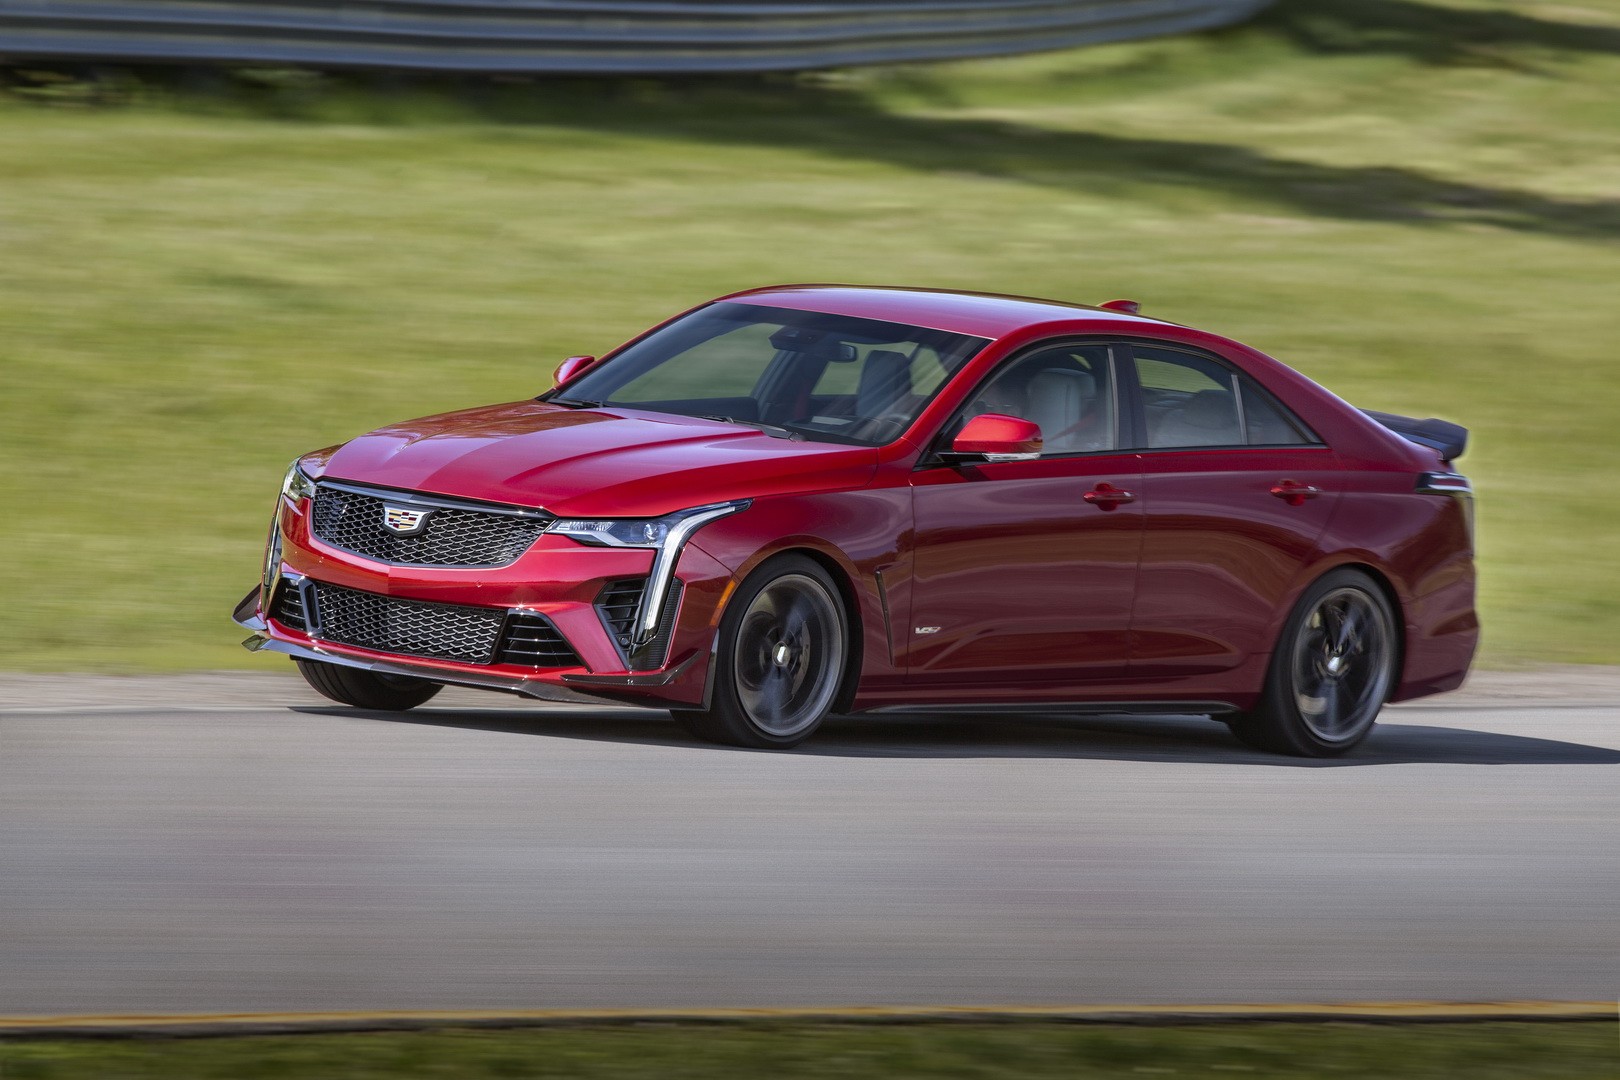 CT4V Blackwing is Officially Cadillac’s Highest Downforce VSeries